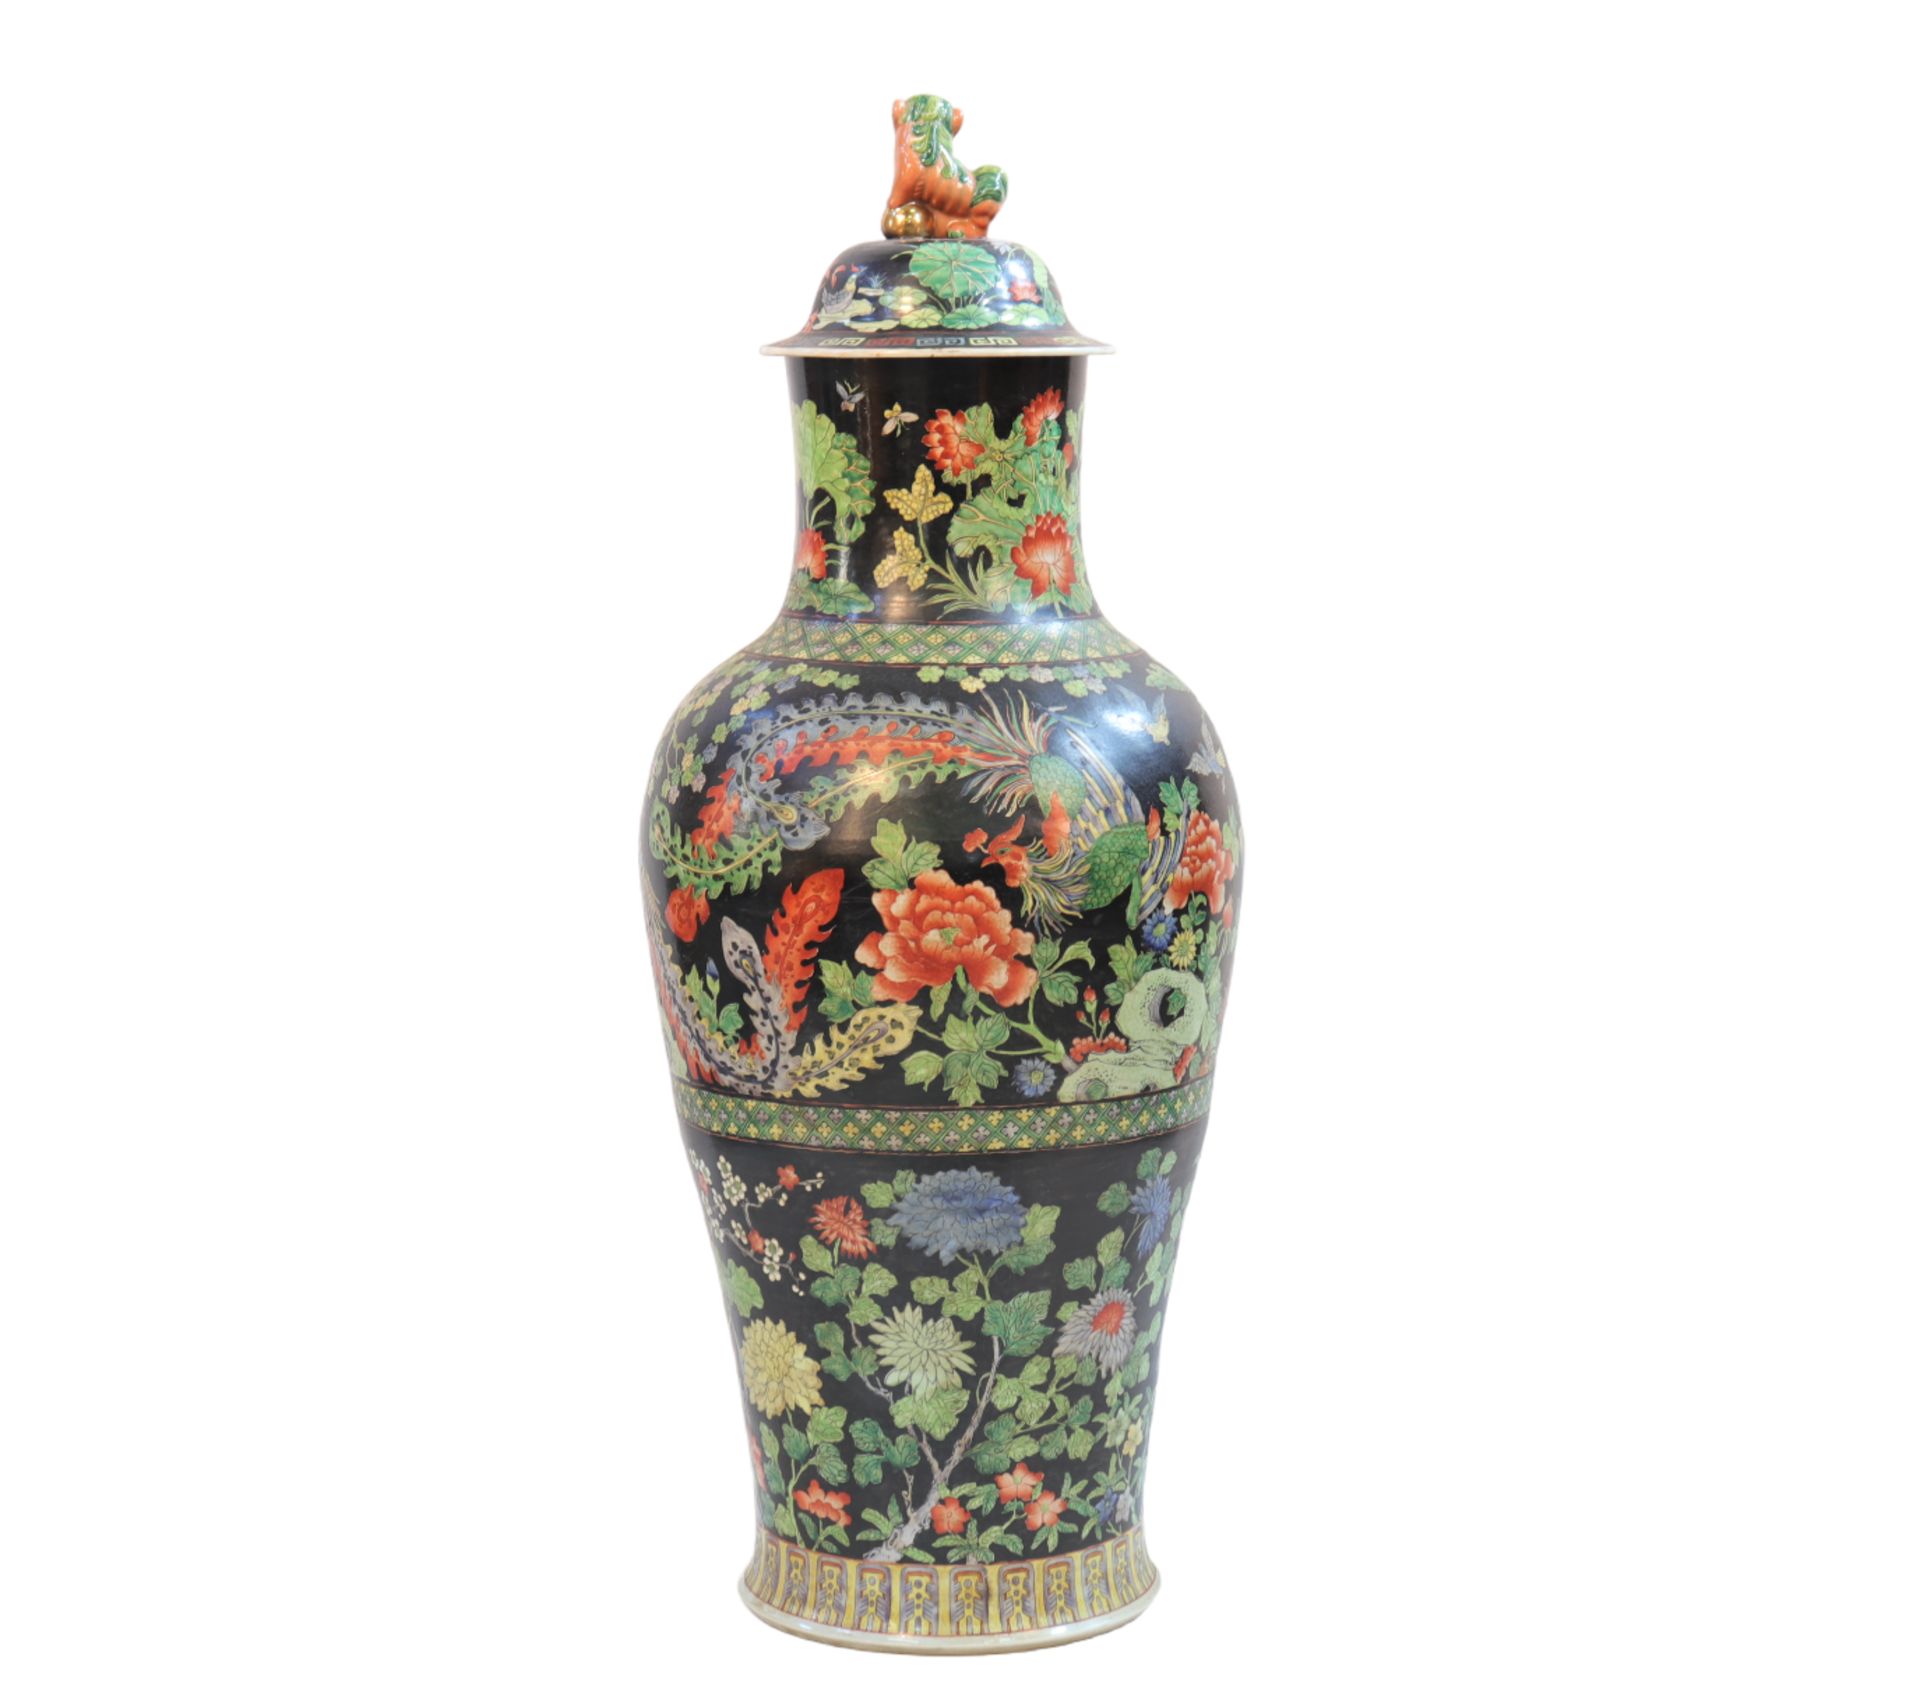 Covered vase from the Famille Noire decorated with flowers and birds from the 19th century